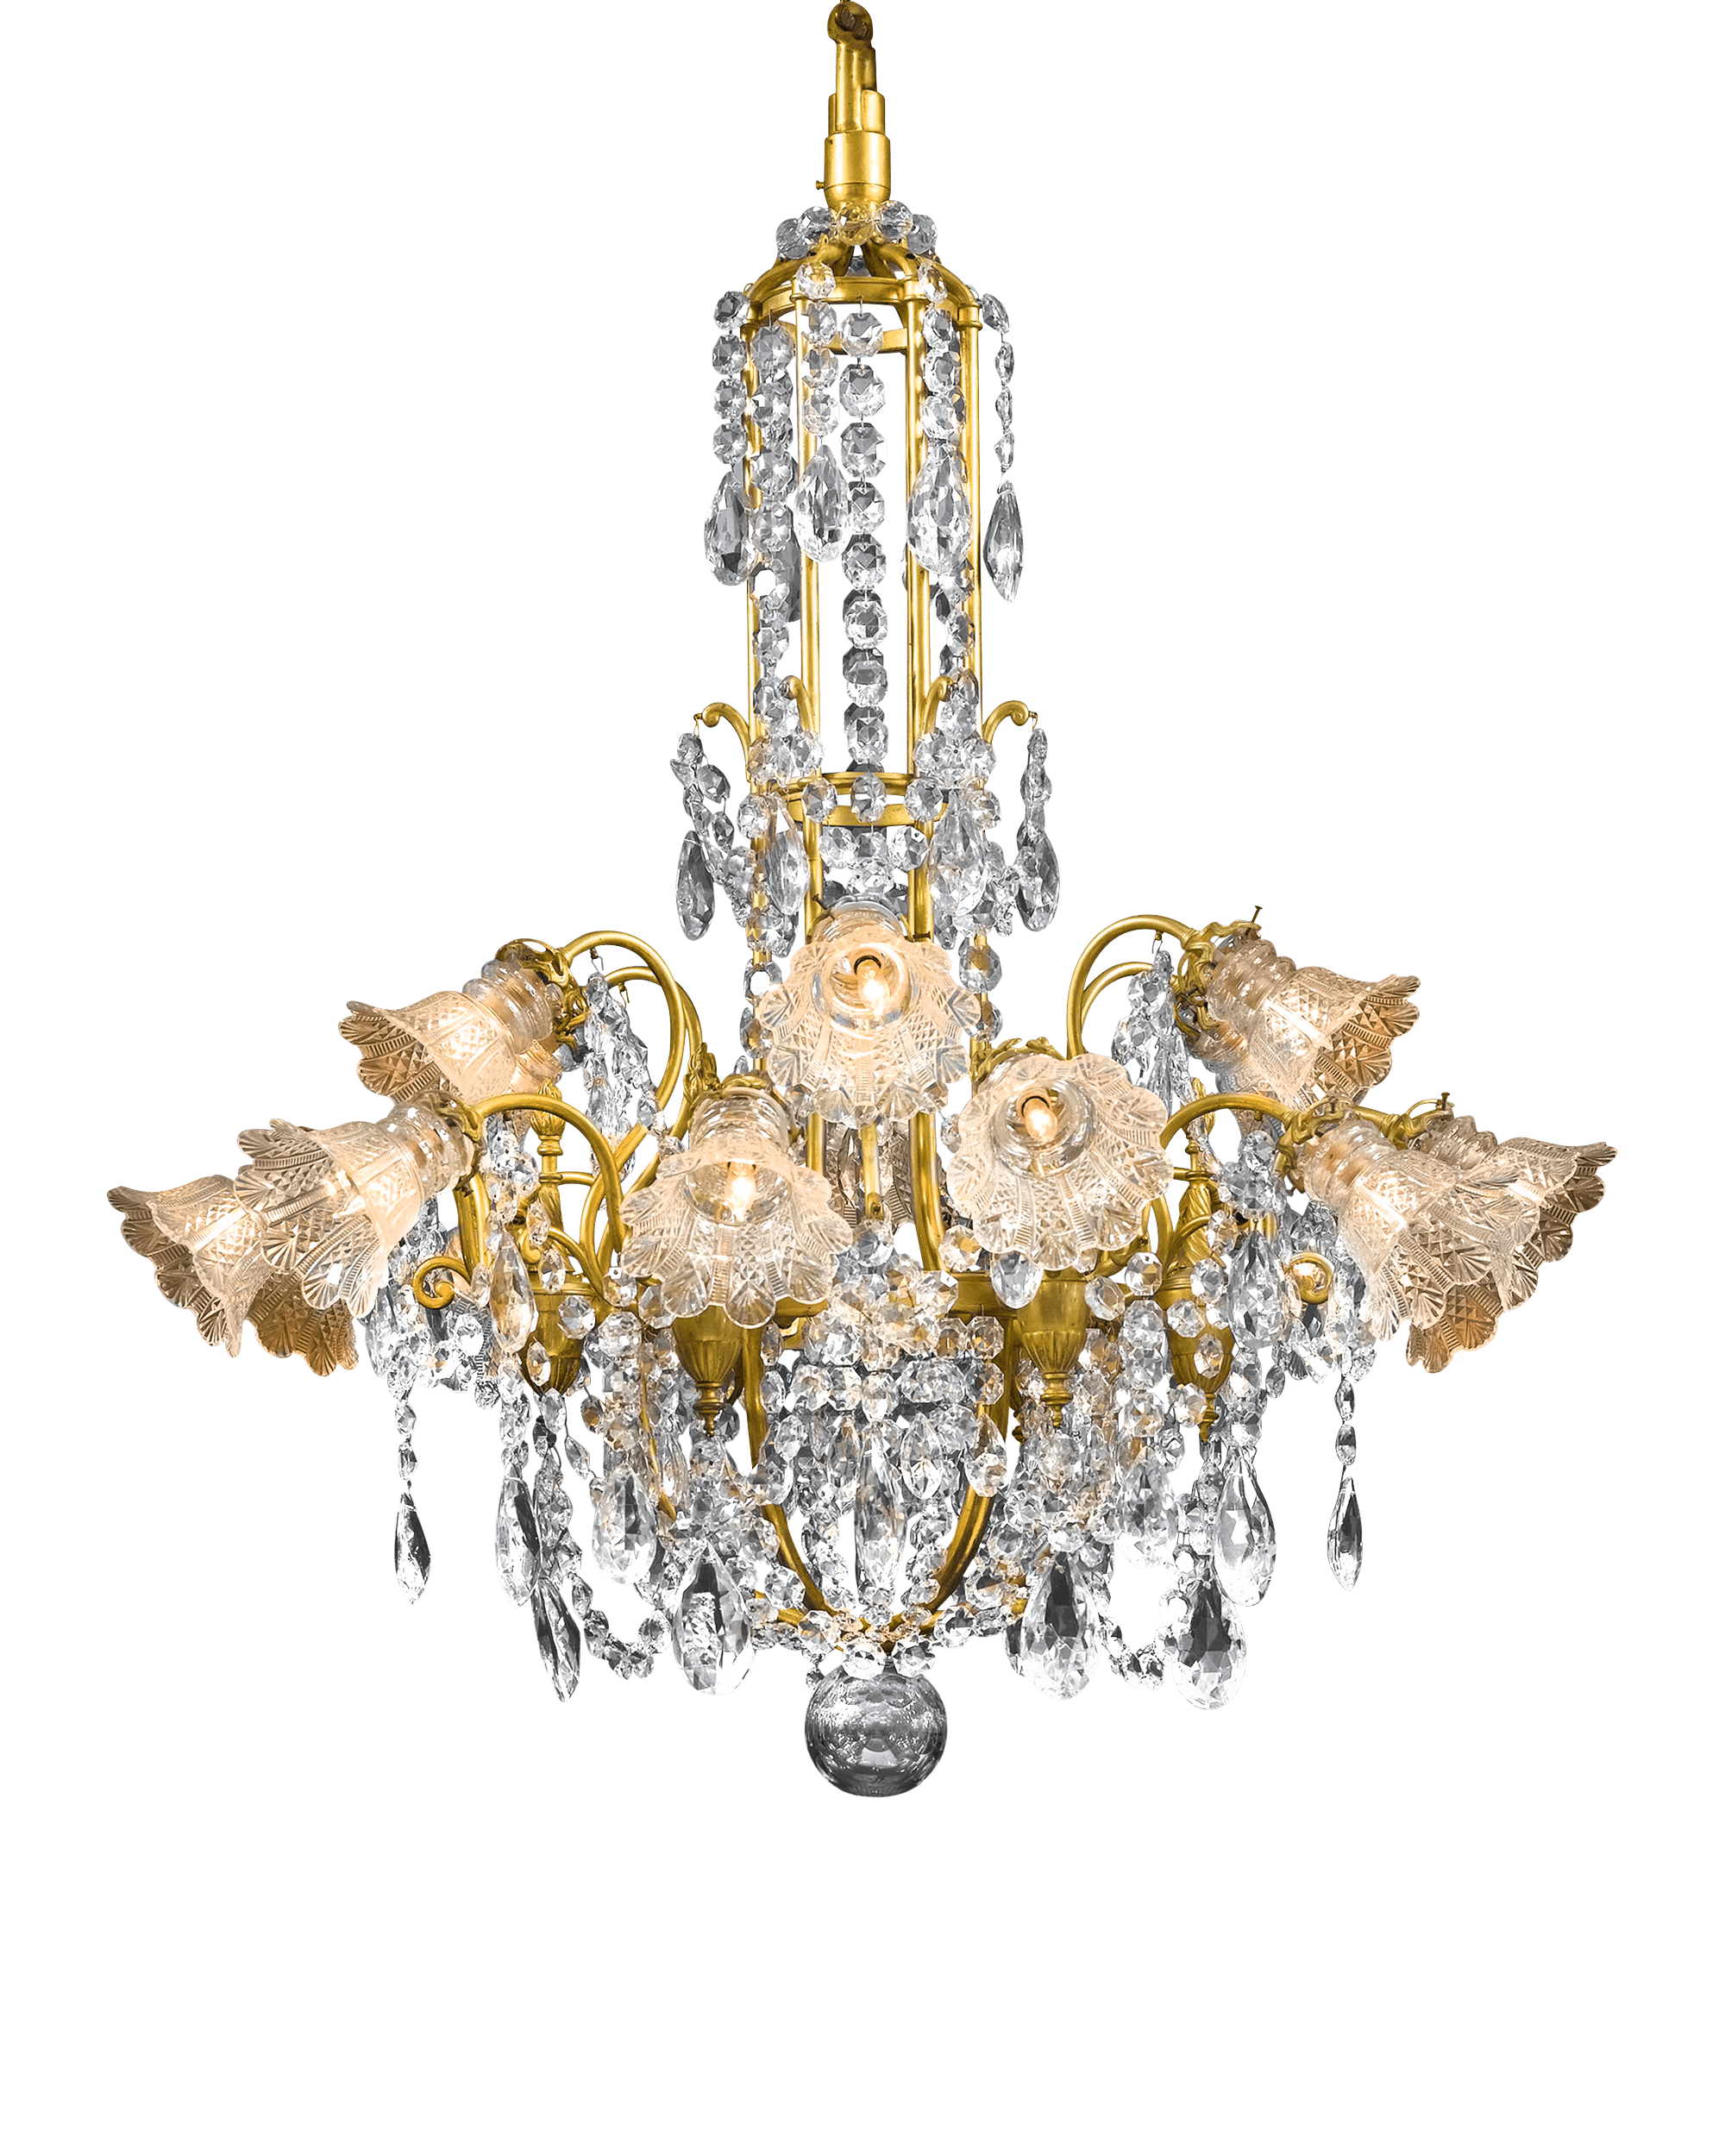 This chandelier is a brilliant specimen of Baccarat crystal